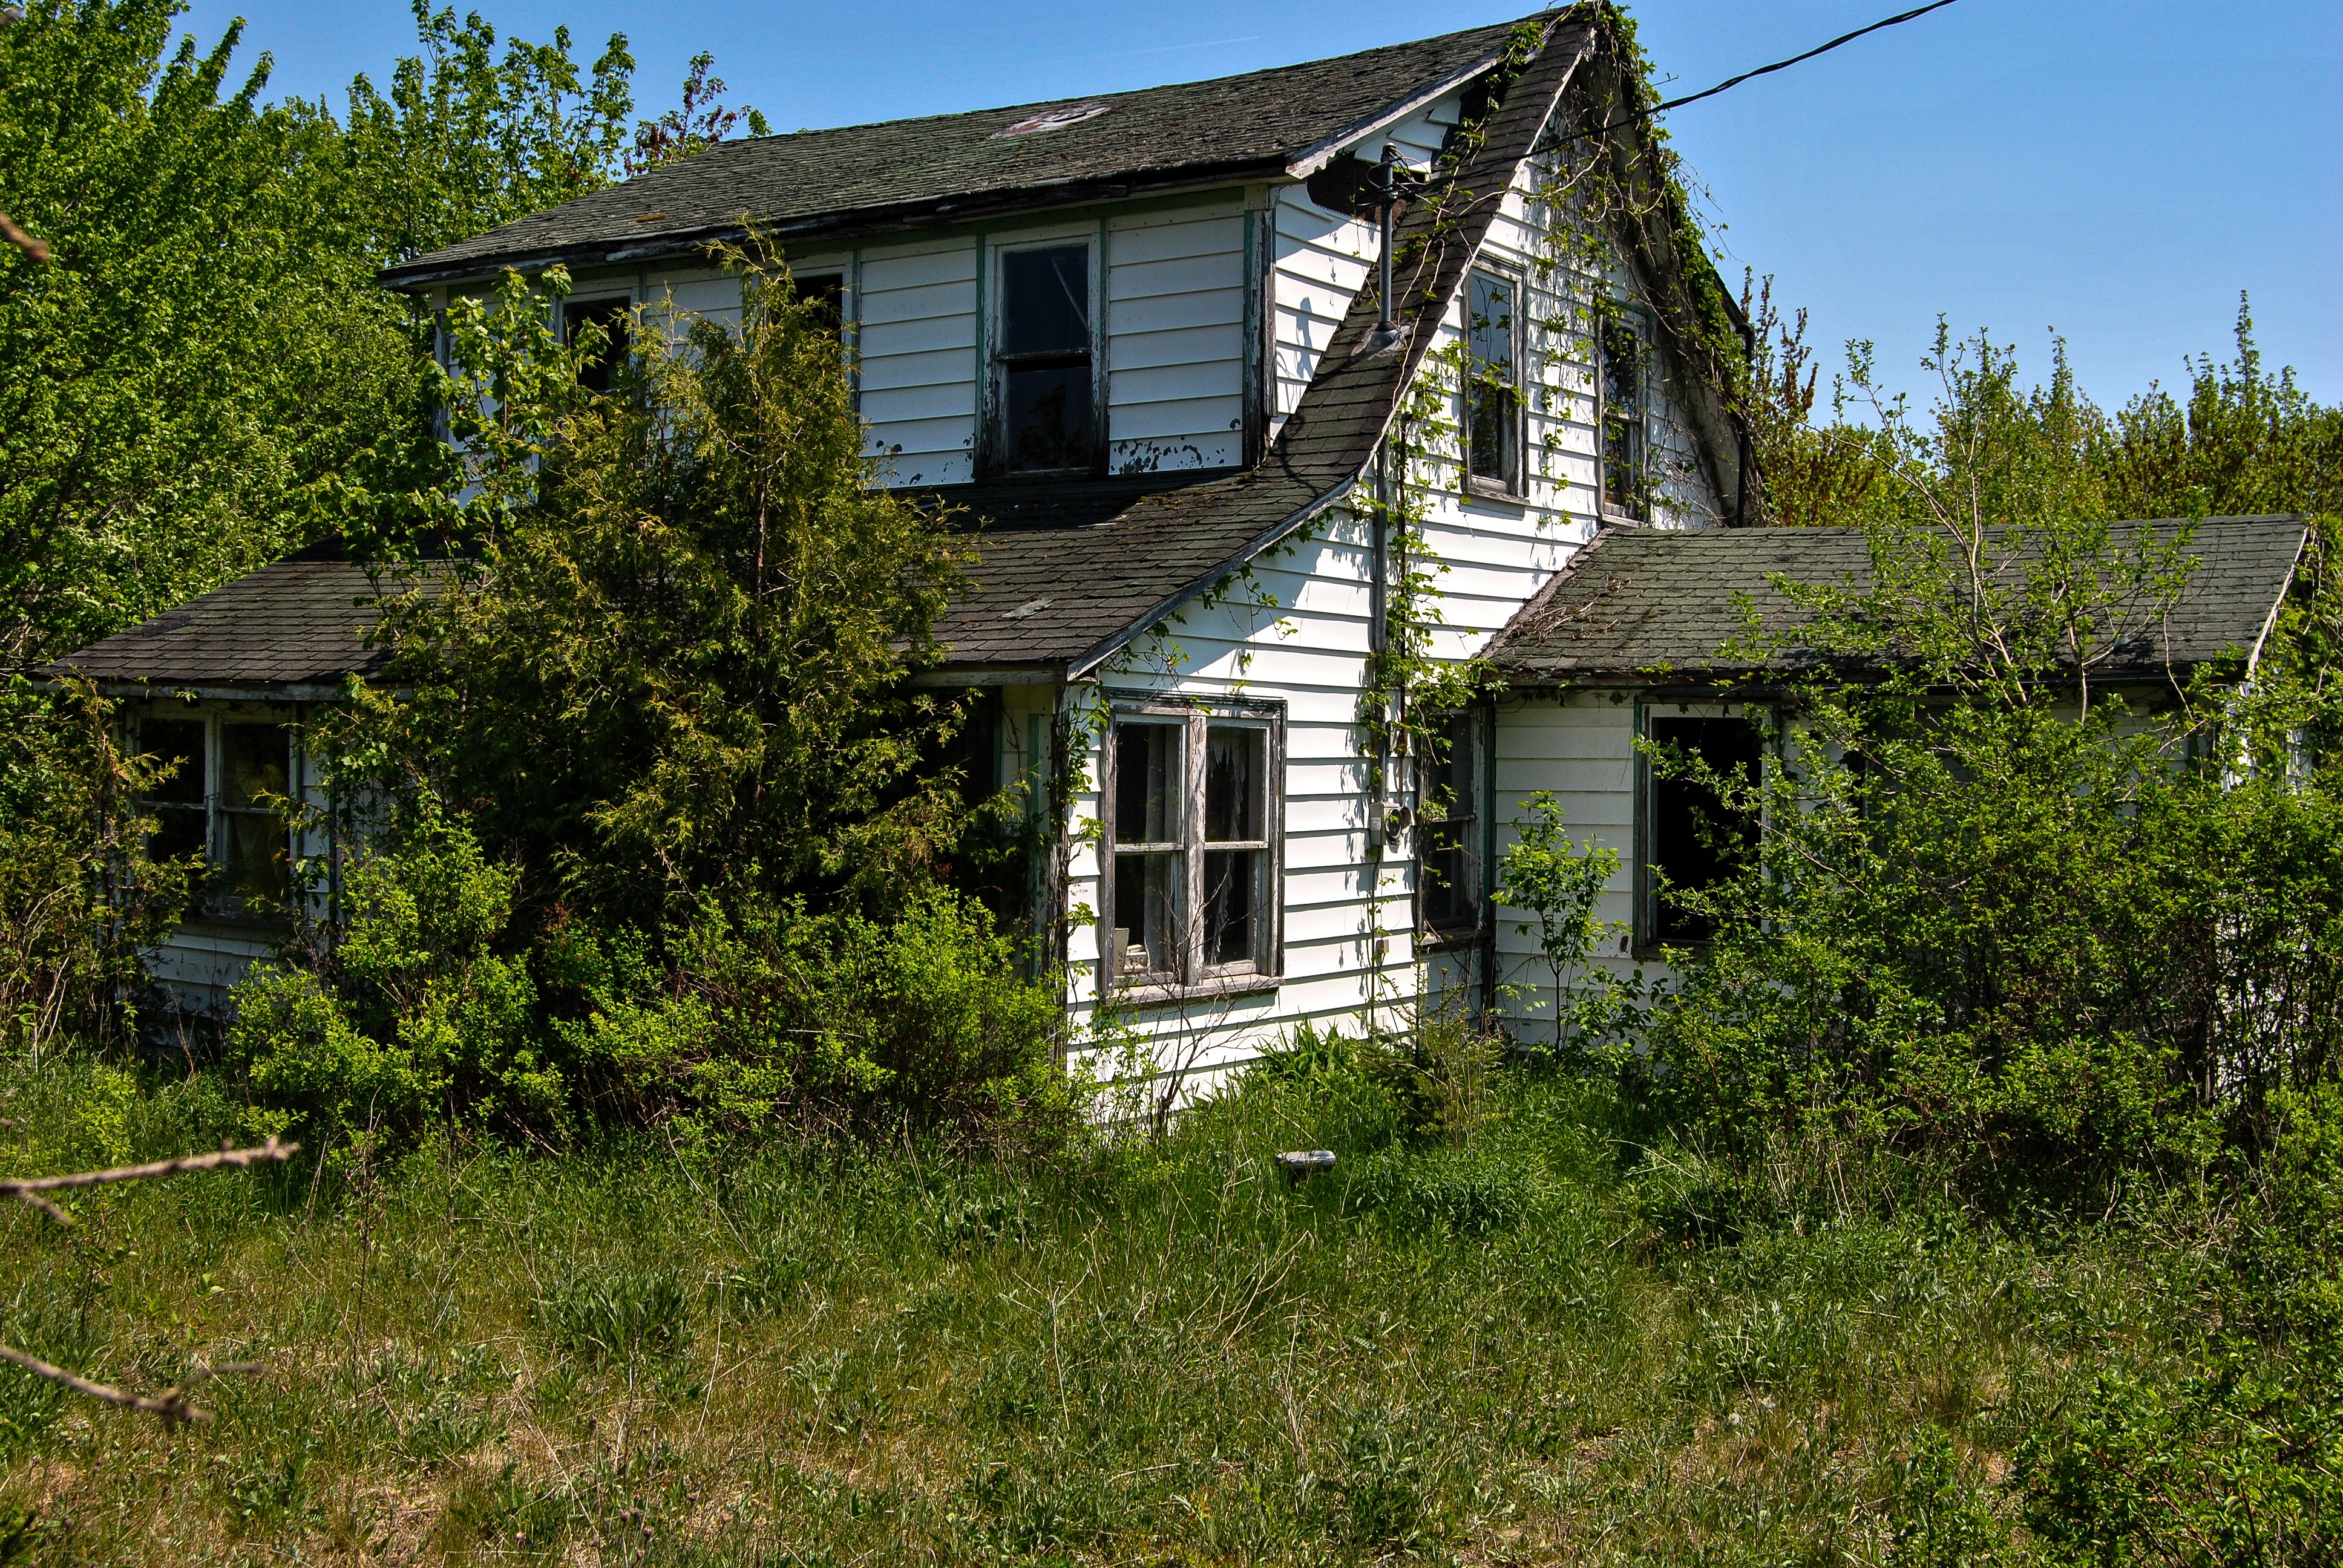 An Over Grown Abandoned House | Source: Shutterstock